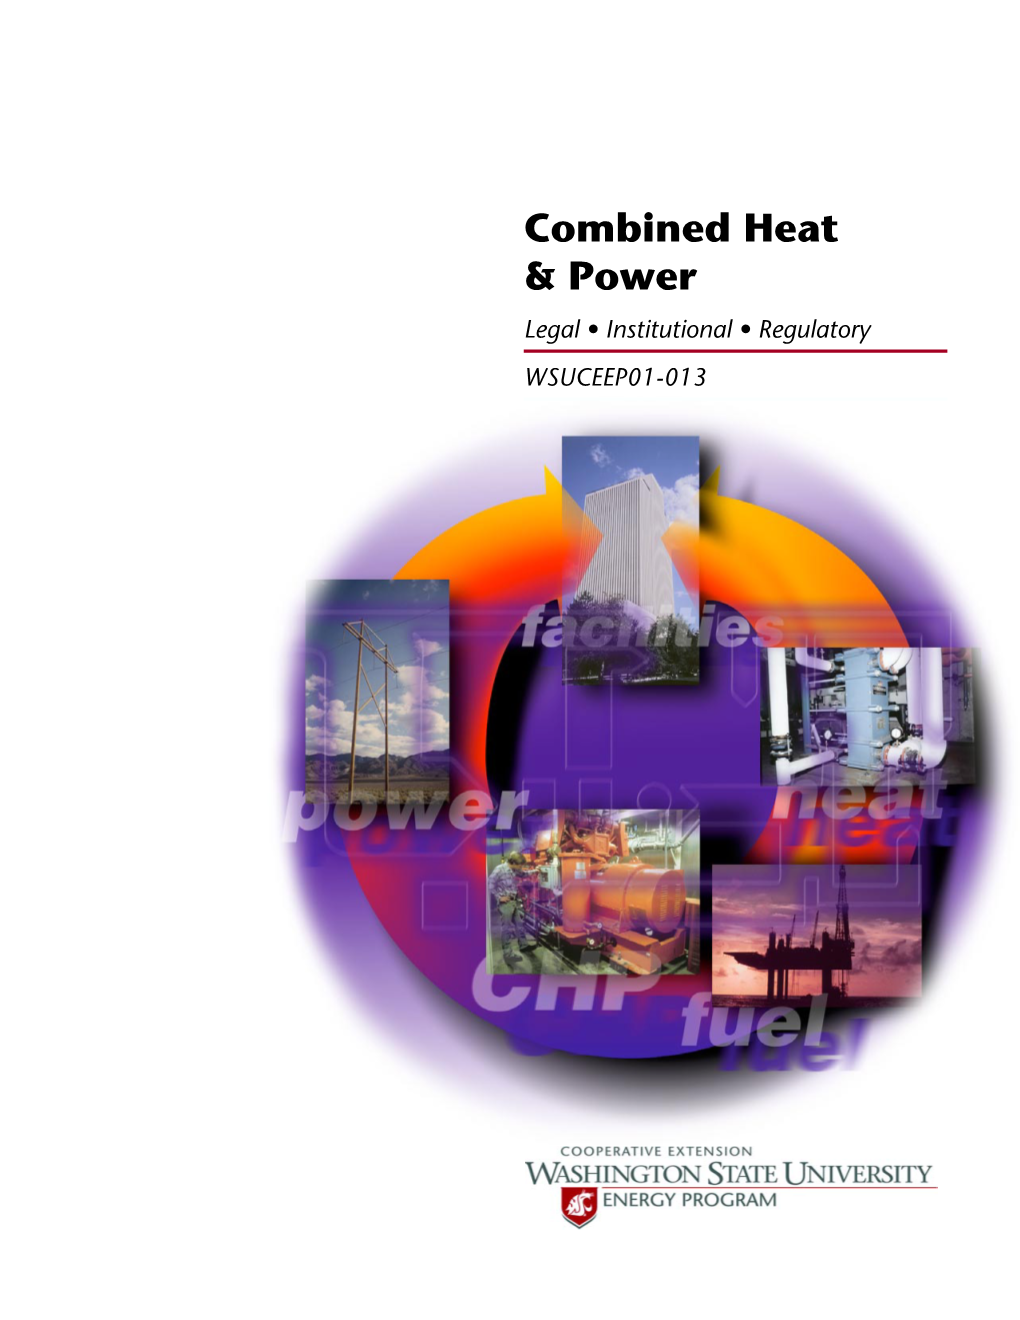 Combined Heat and Power Projects at State Facilities